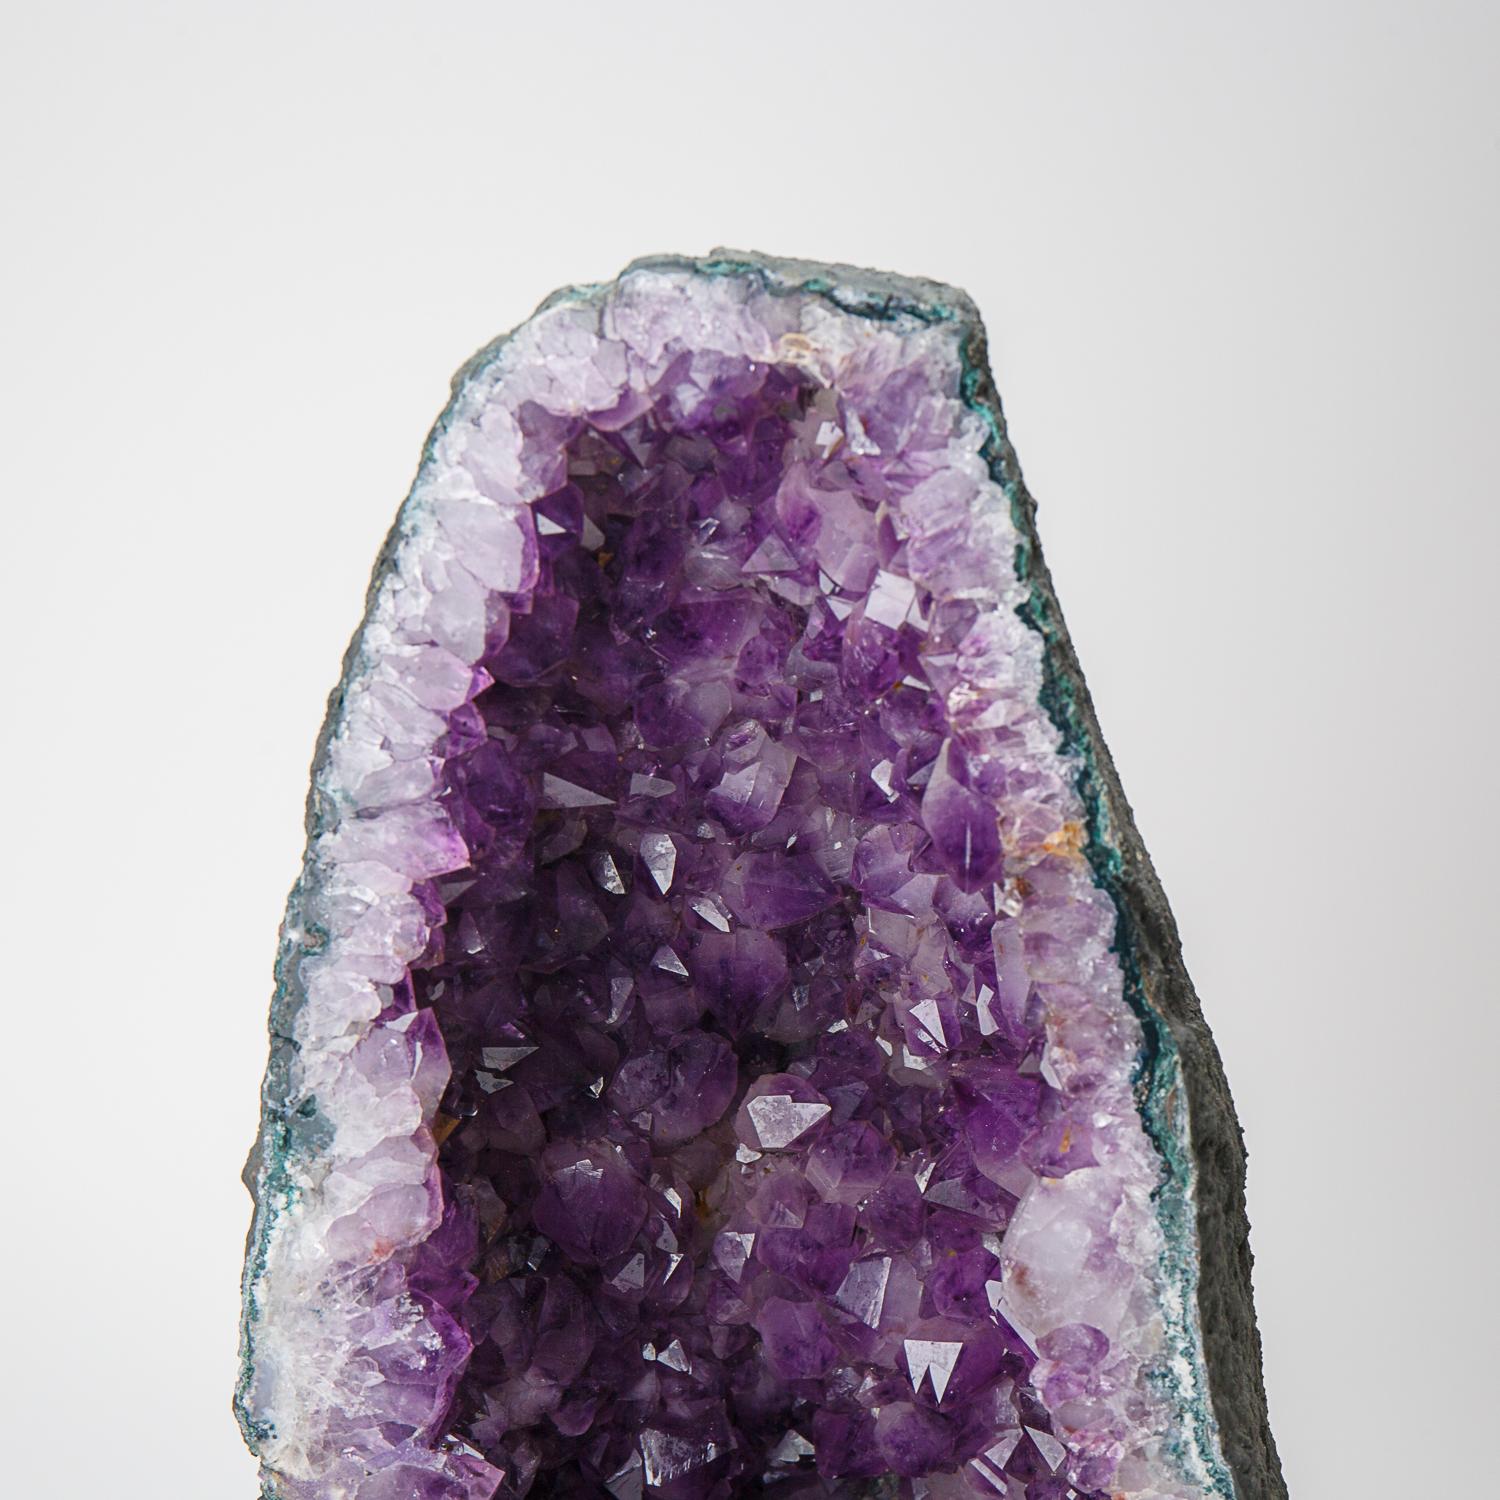 Contemporary Genuine Amethyst Cluster Geode from Brazil (49 lbs) For Sale